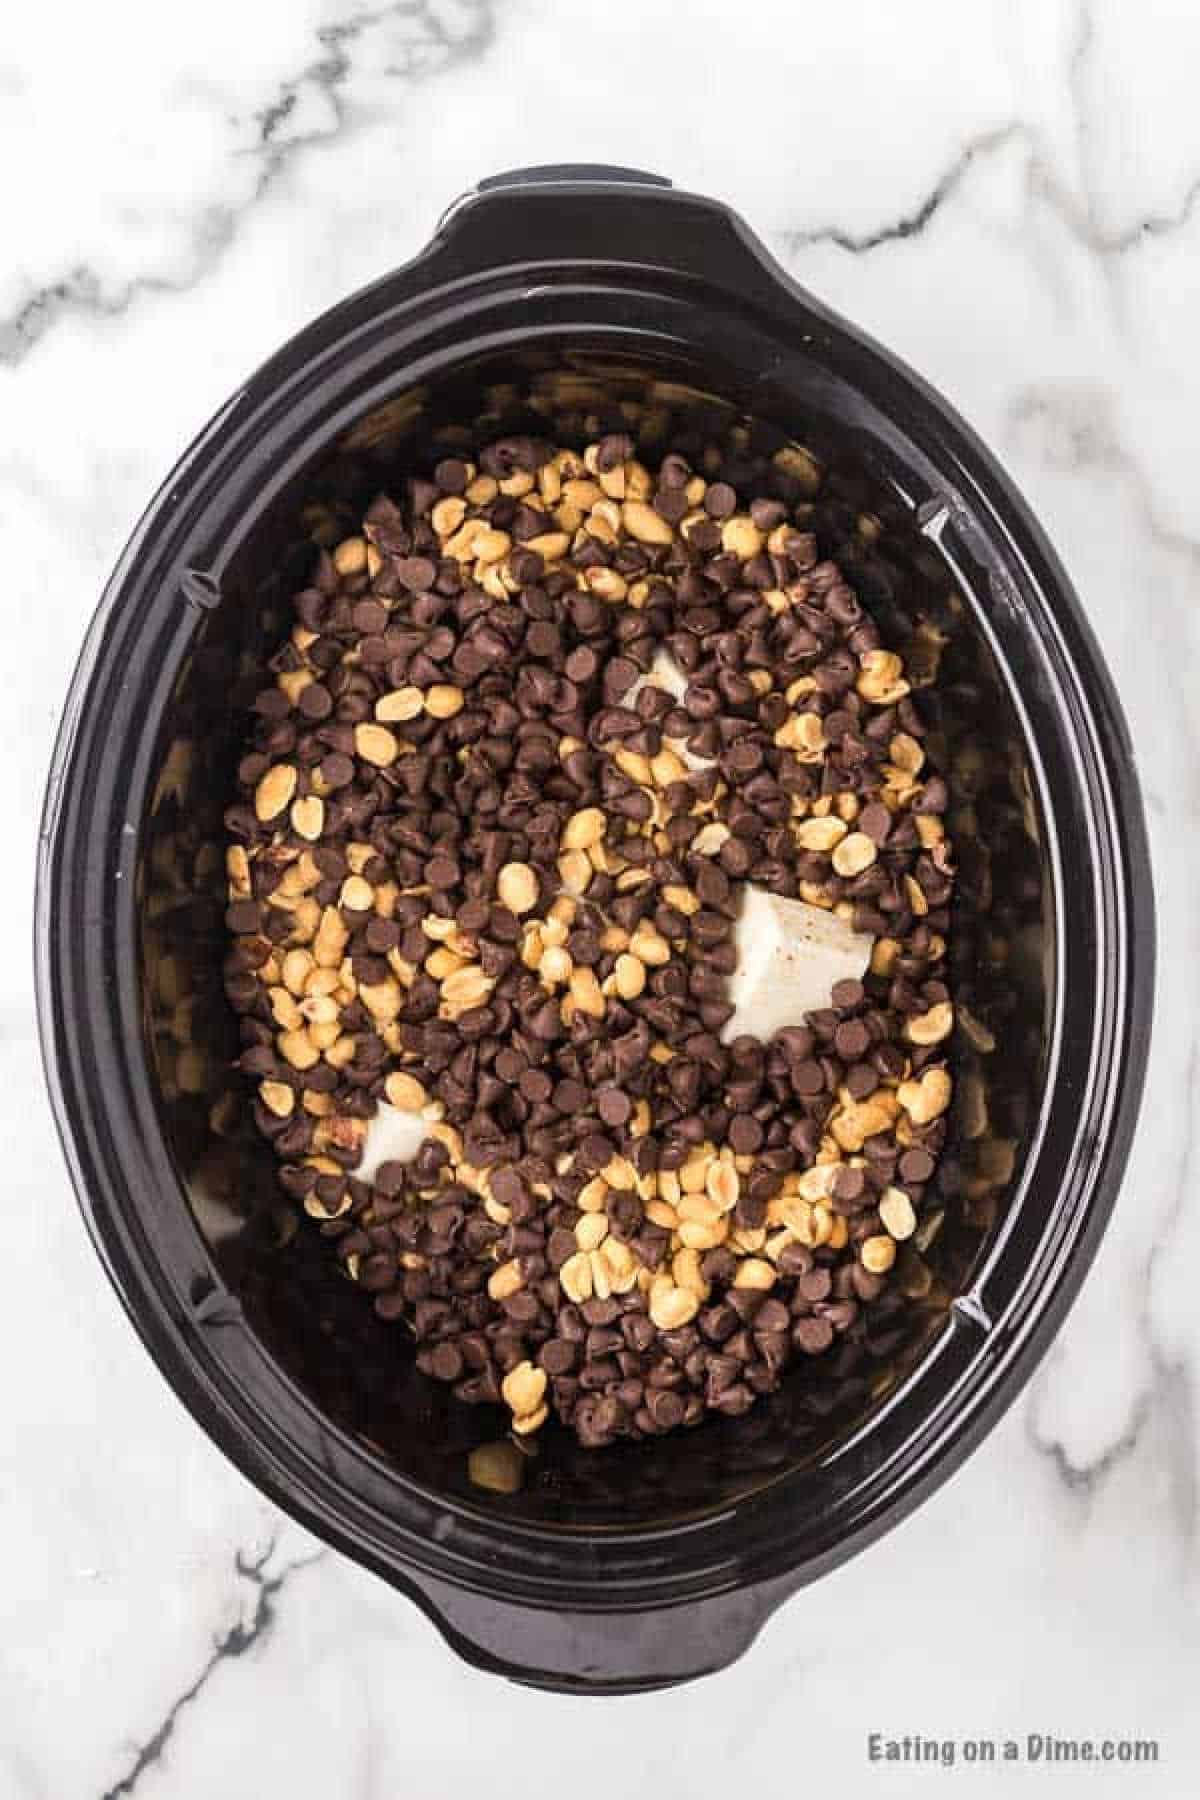 Chocolate chips and peanuts in the slow cooker topped on the almond bark